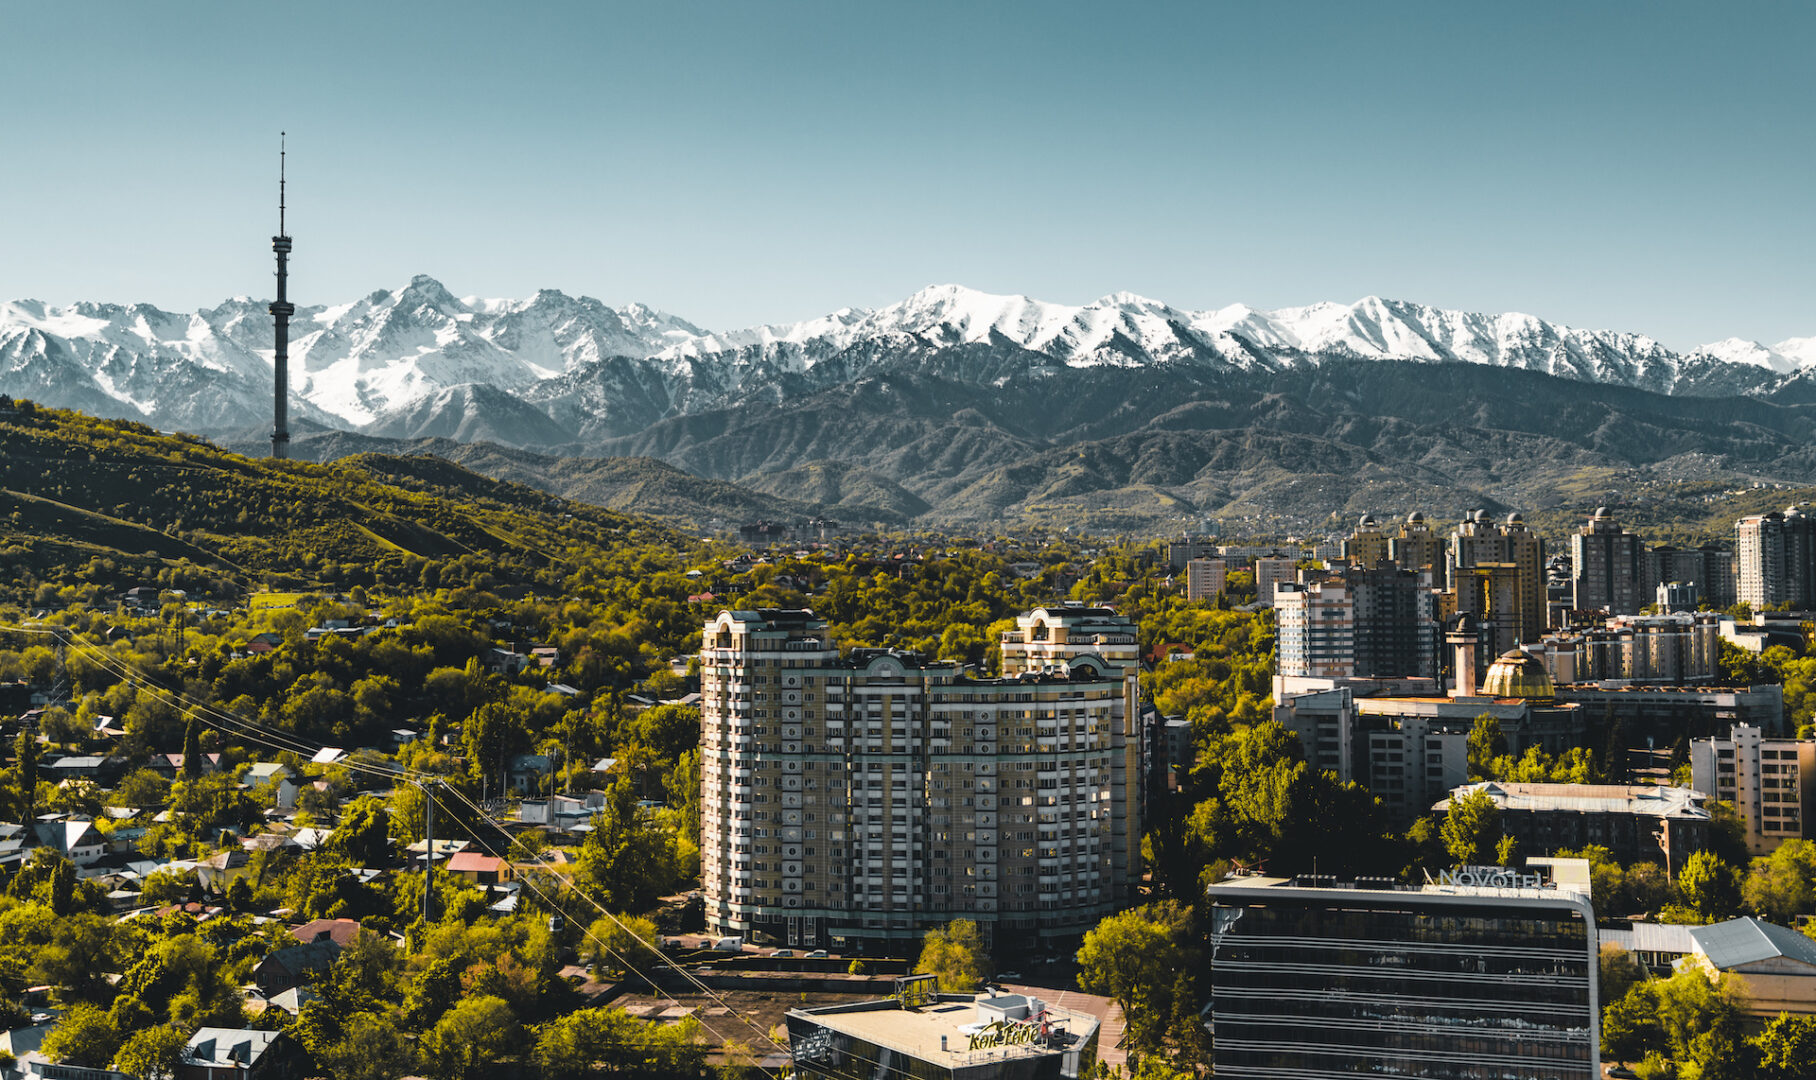 City landscape on a background of snow-capped Tian Shan mountains in Almaty Kazakhstan